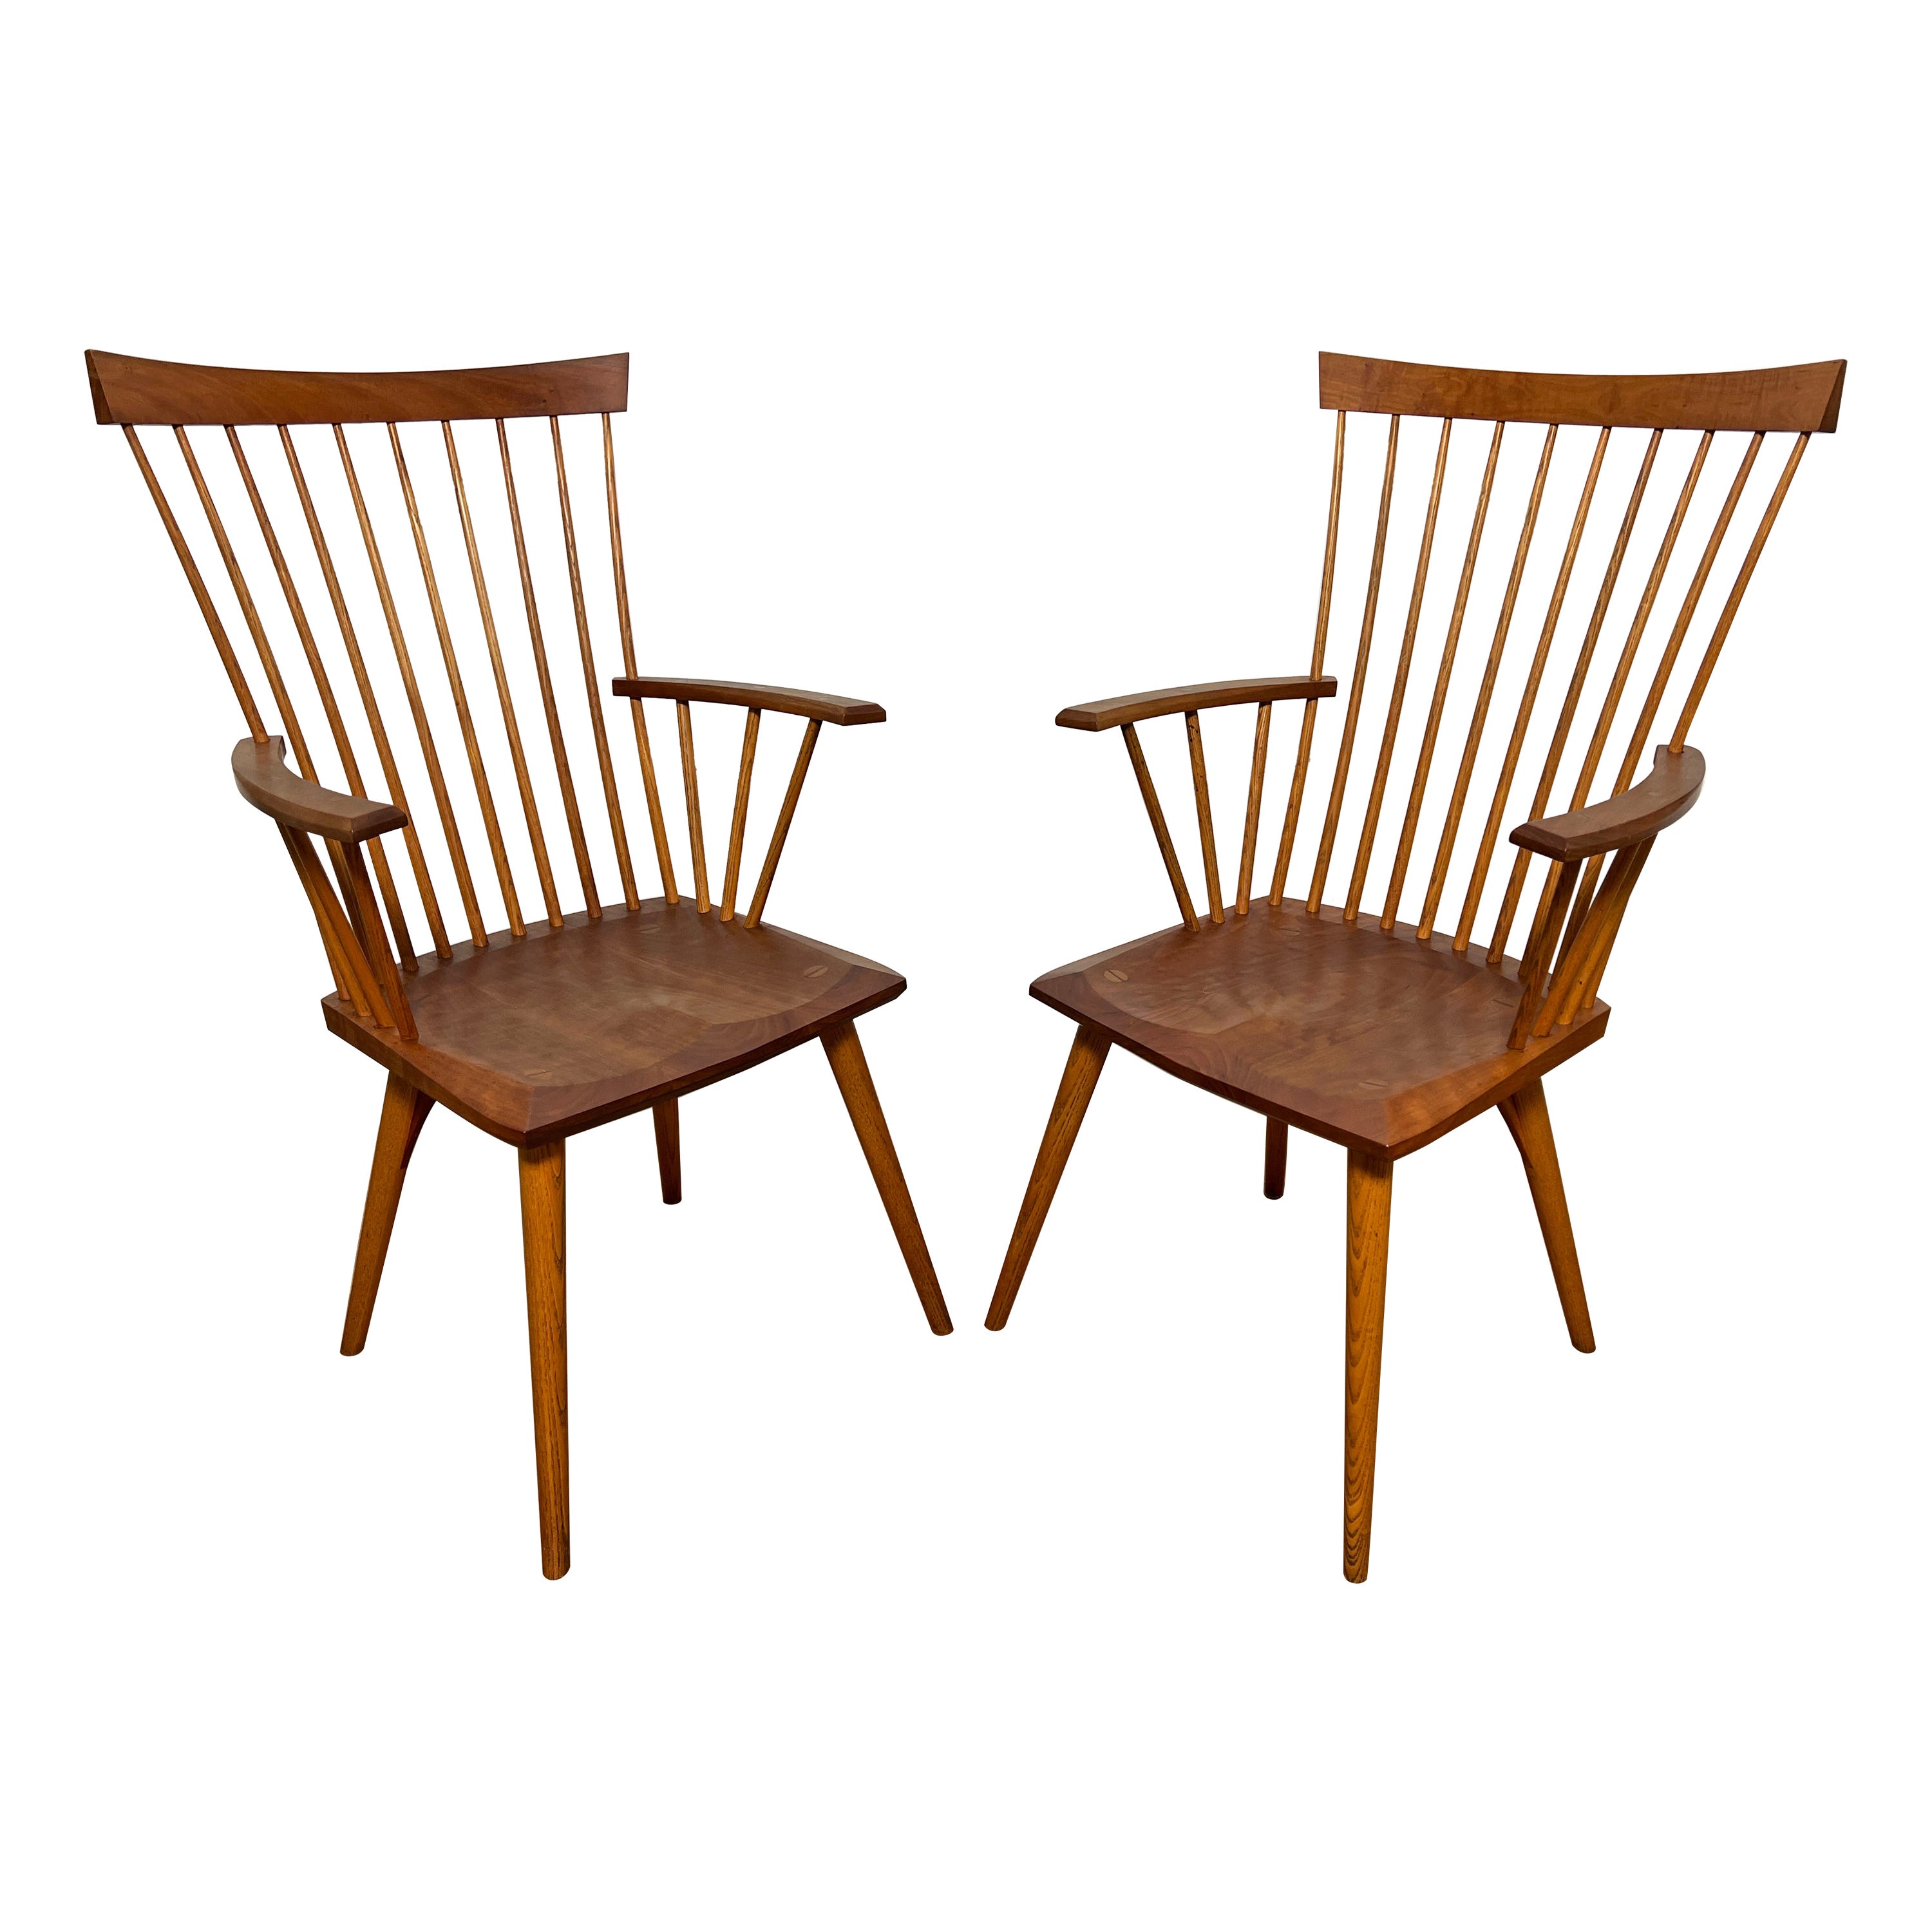 Pair of Thomas Moser "Eastward" Arm Chairs in Cherry Dated 1991